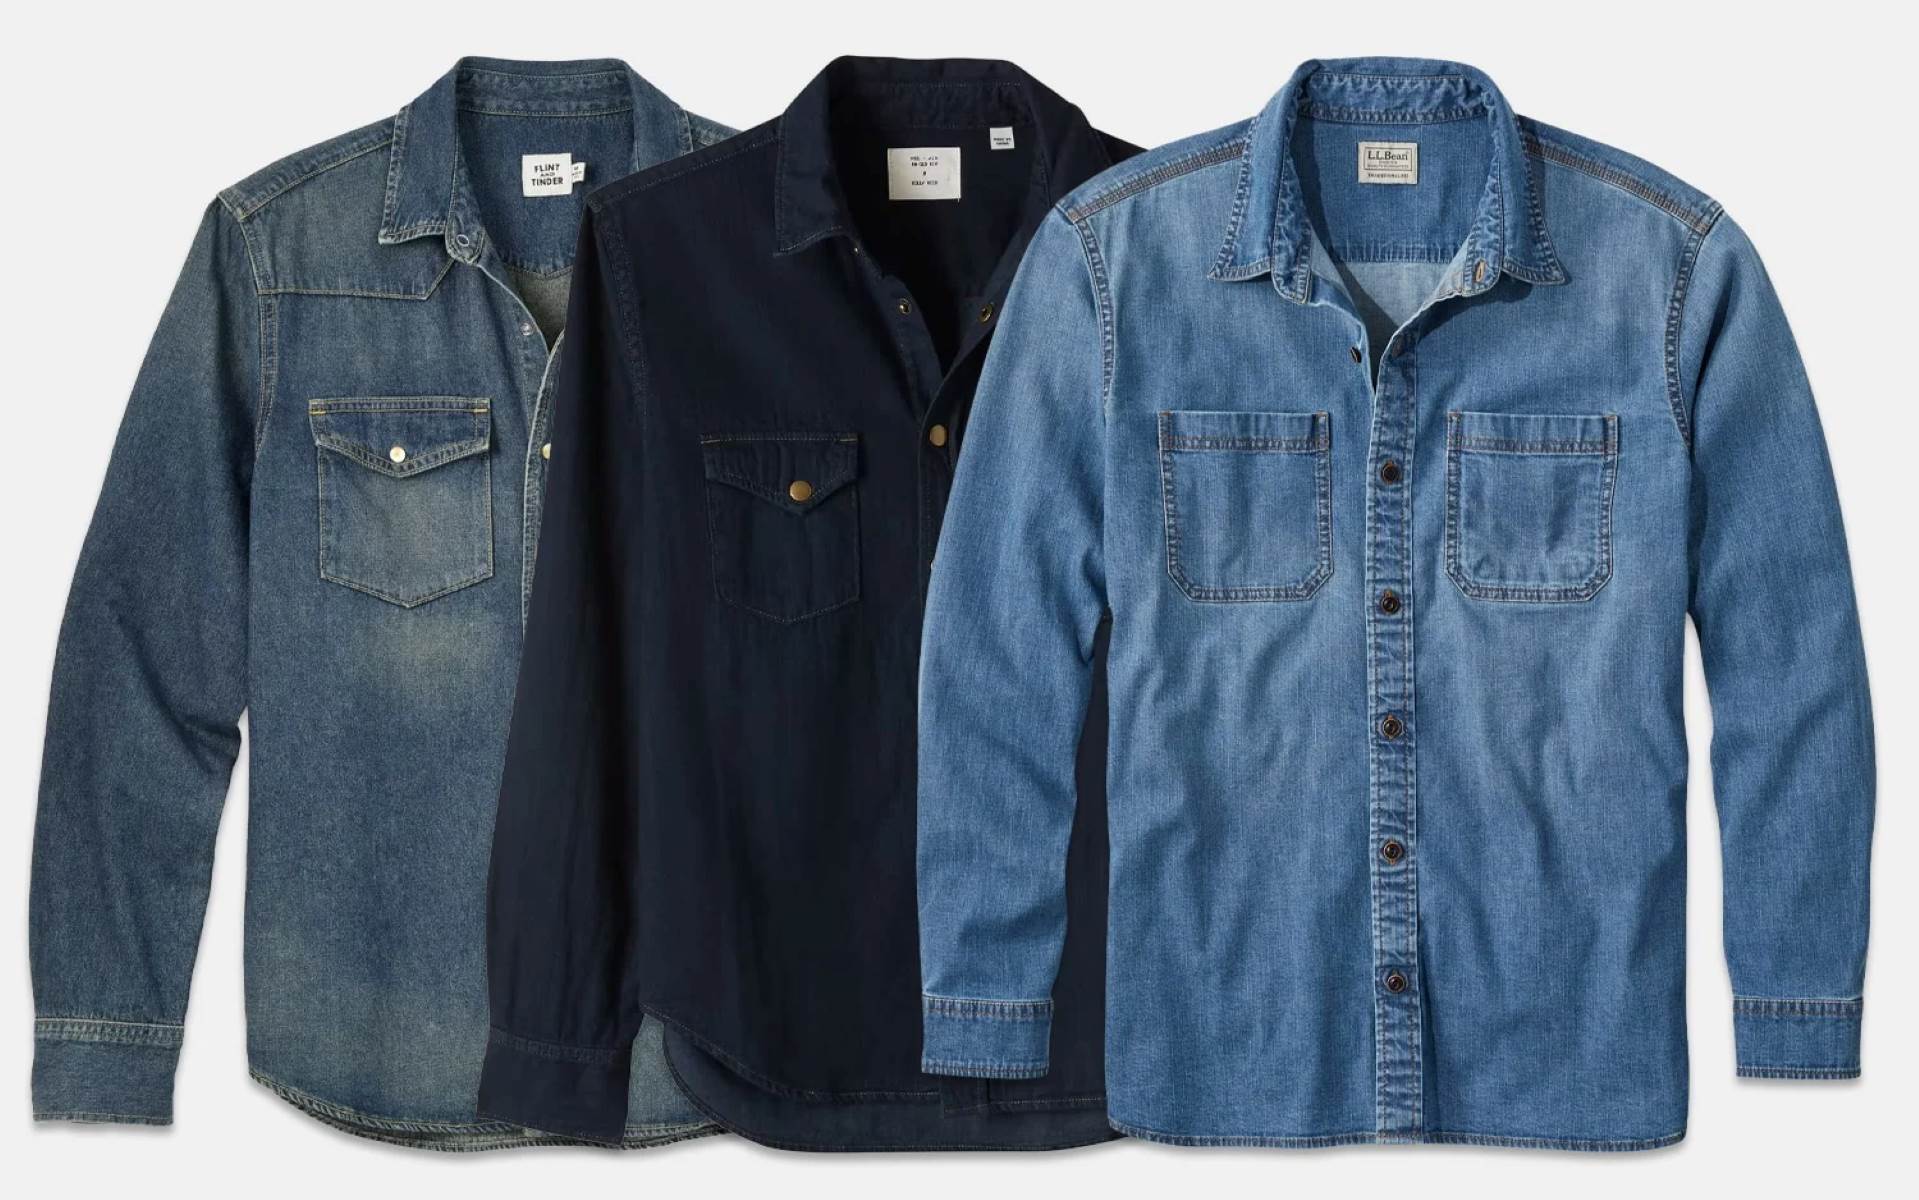 The Surprising Benefits Of Men's Denim Shirts You Never Knew!